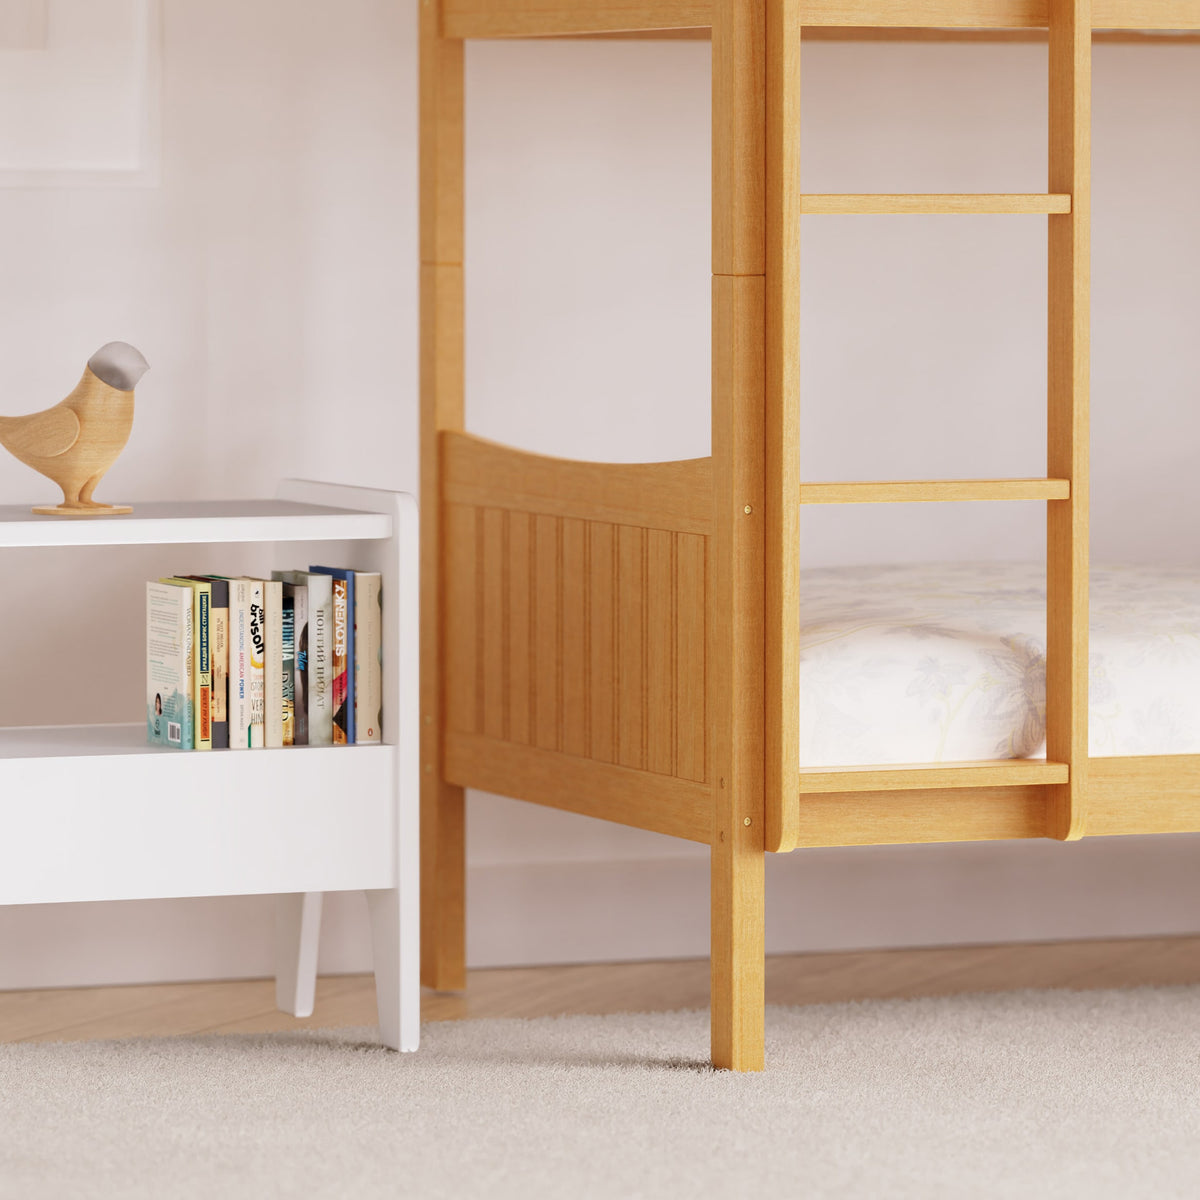 Finchley Bunk Bed